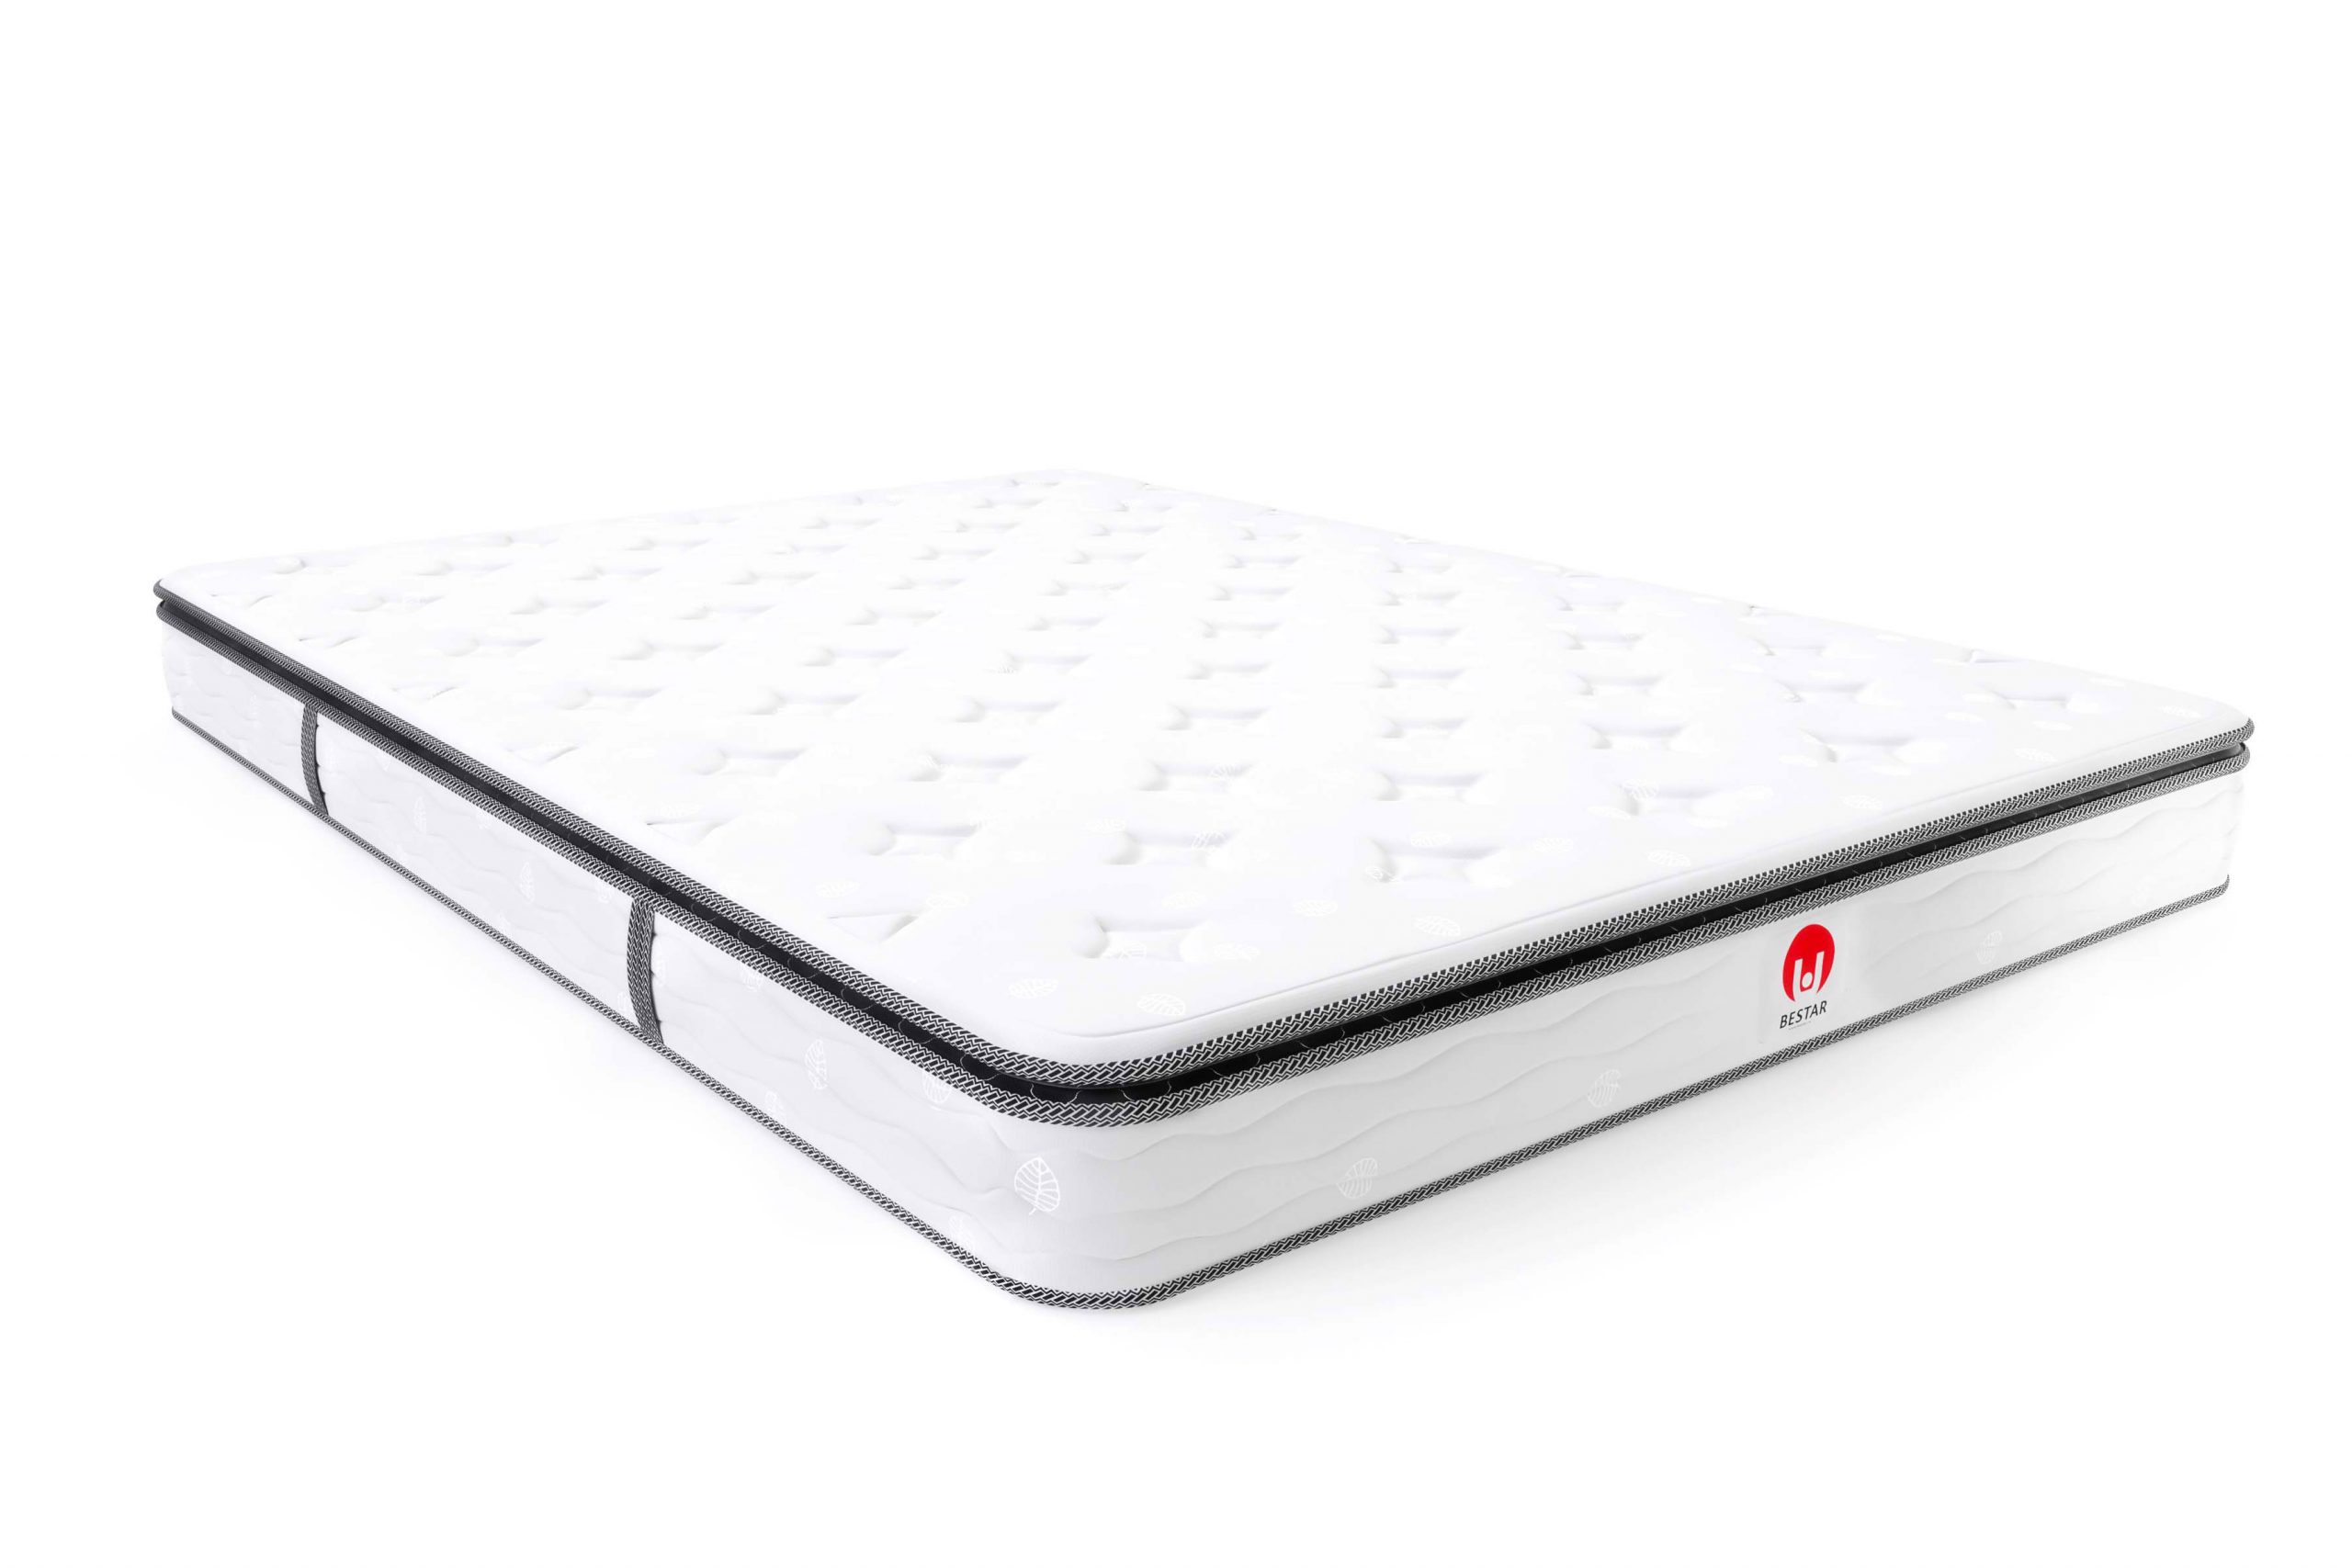 4 Questions to Help Make the Right Mattress Choice for You